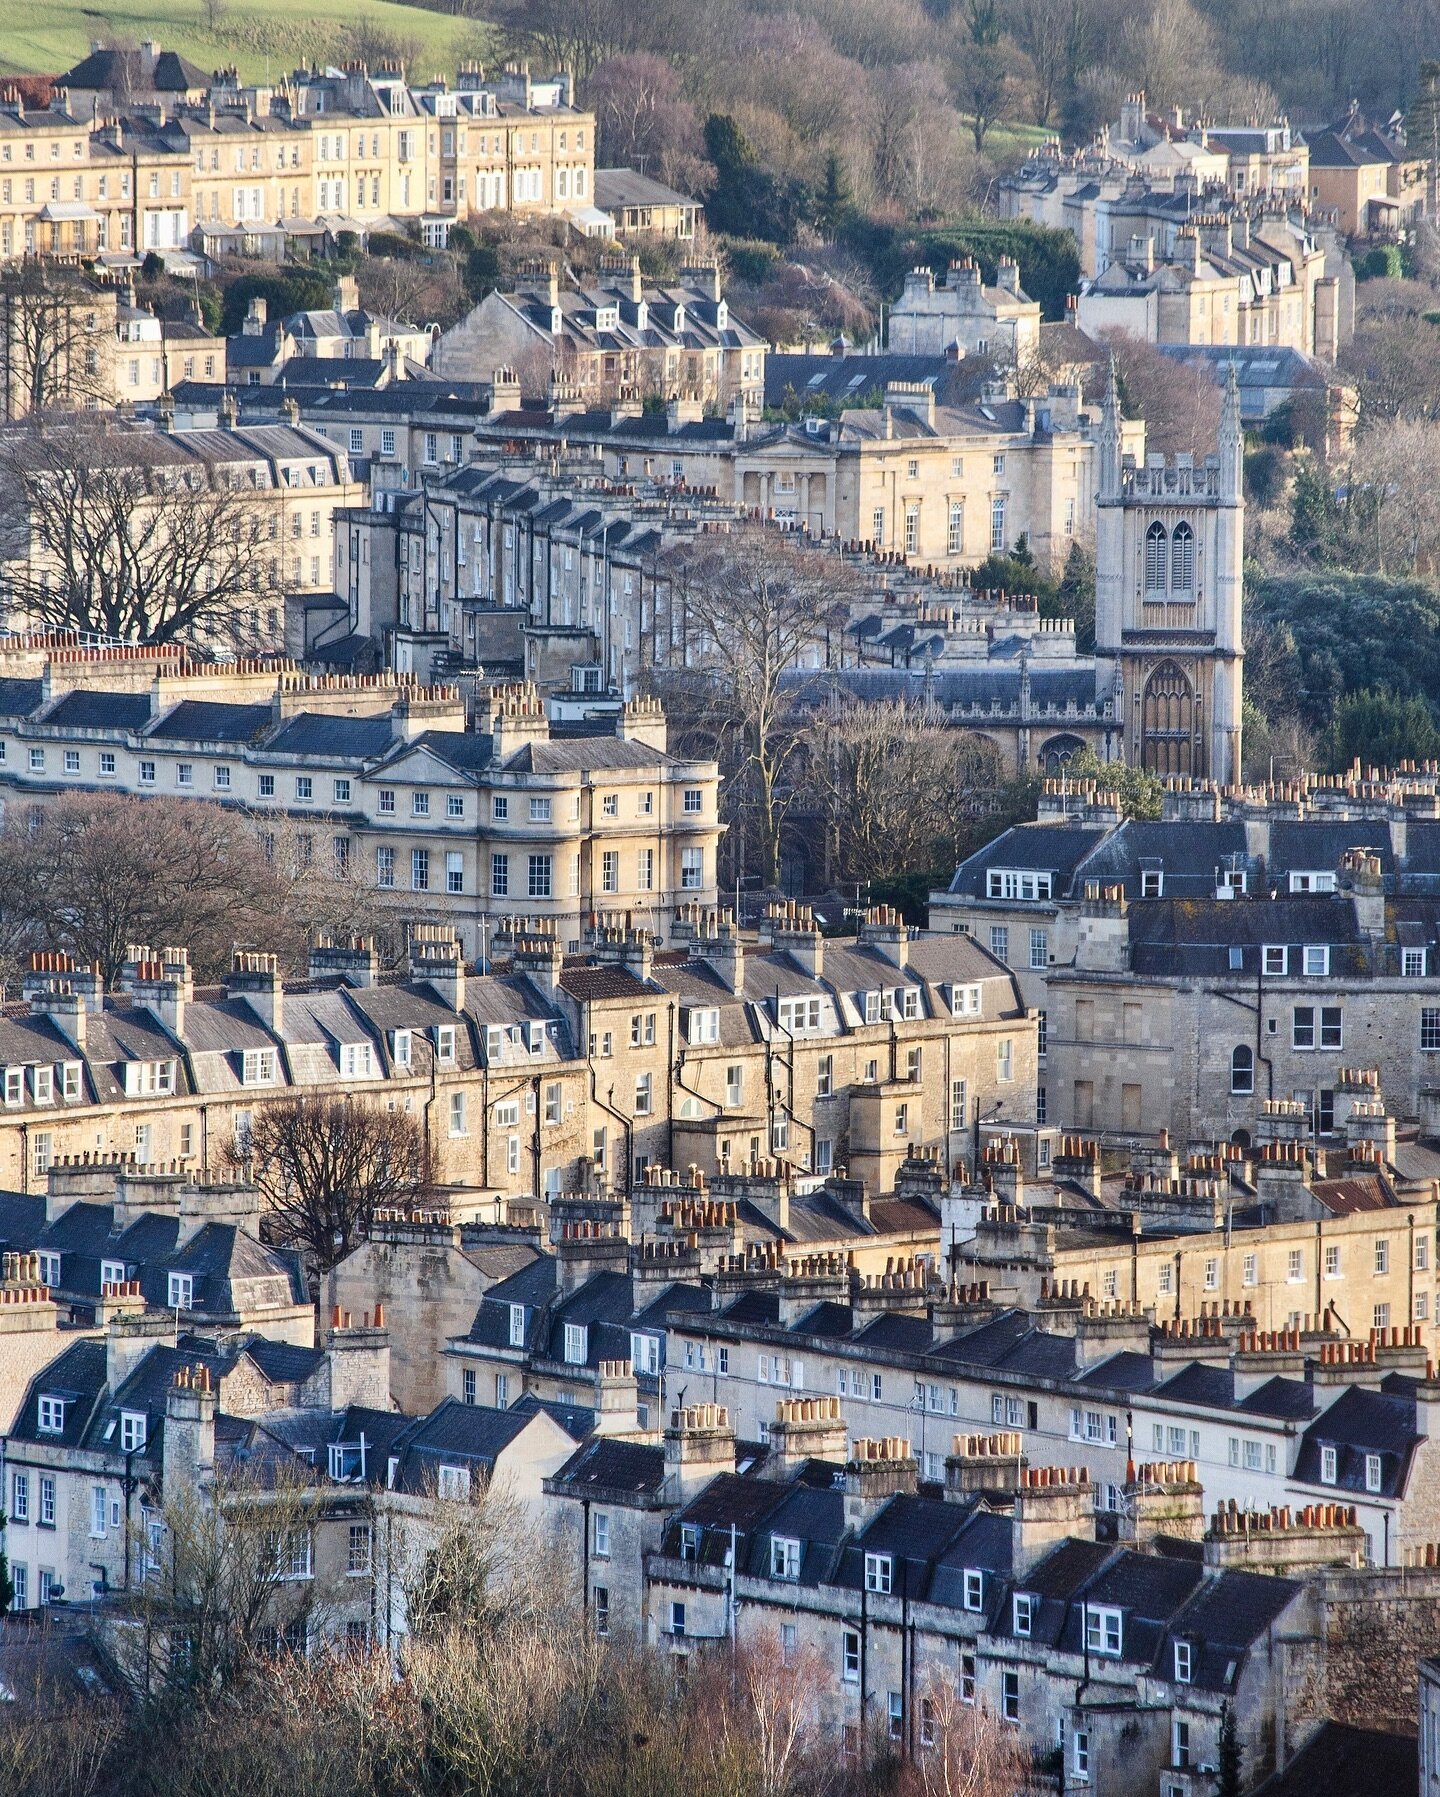 Gazing upon Bath from a distance is a wonderful experience. Pick a good spot to reveal a city full of honey coloured buildings that seem to effortlessly arrange themselves along long streets and steep hillsides. 

The warm glow of the stone under sun